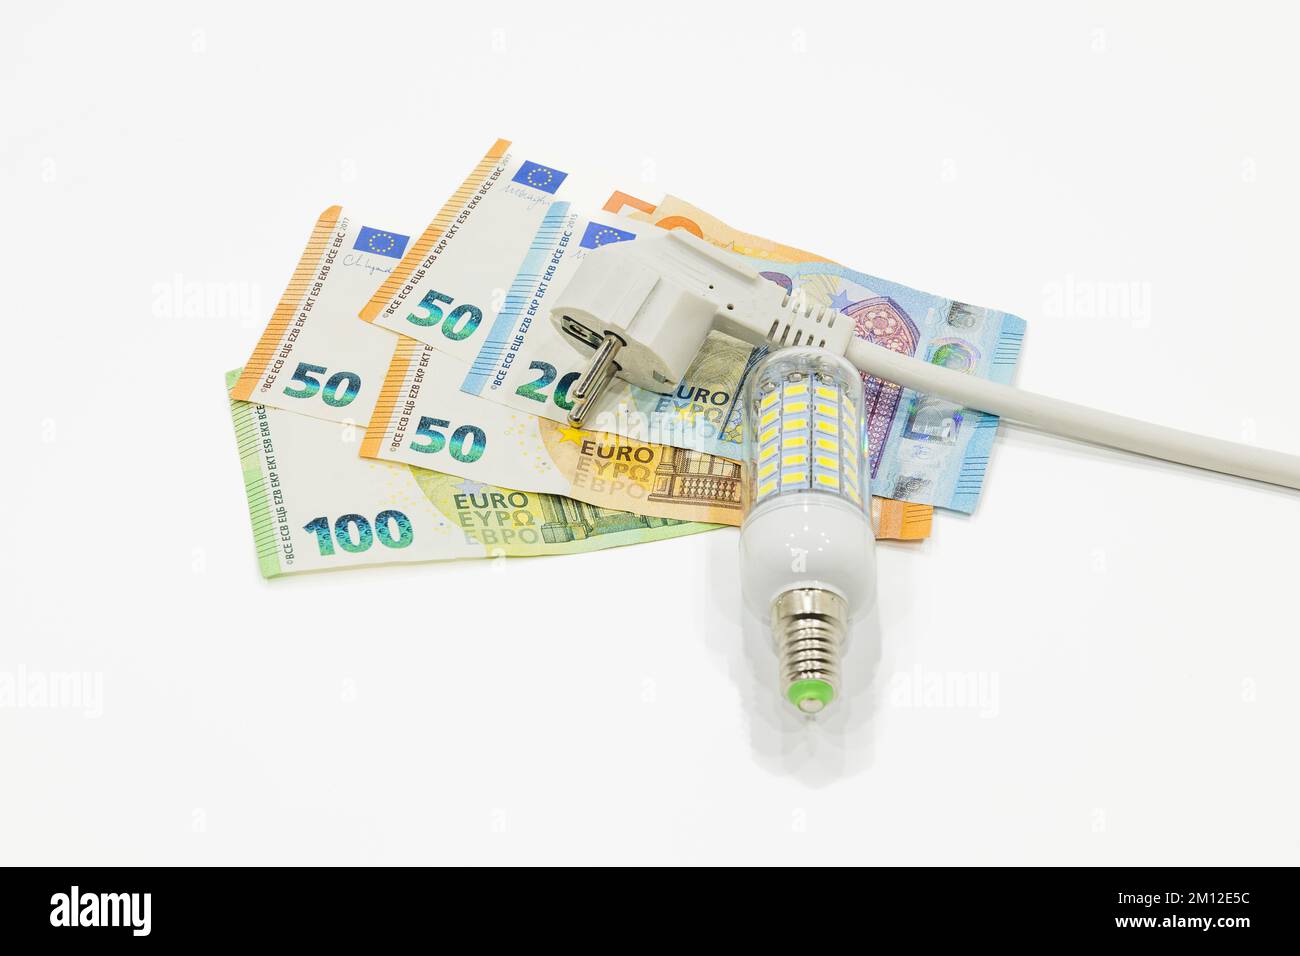 Electric plug, light bulb, and the euro money banknotes. Concept of increasing energy costs Stock Photo